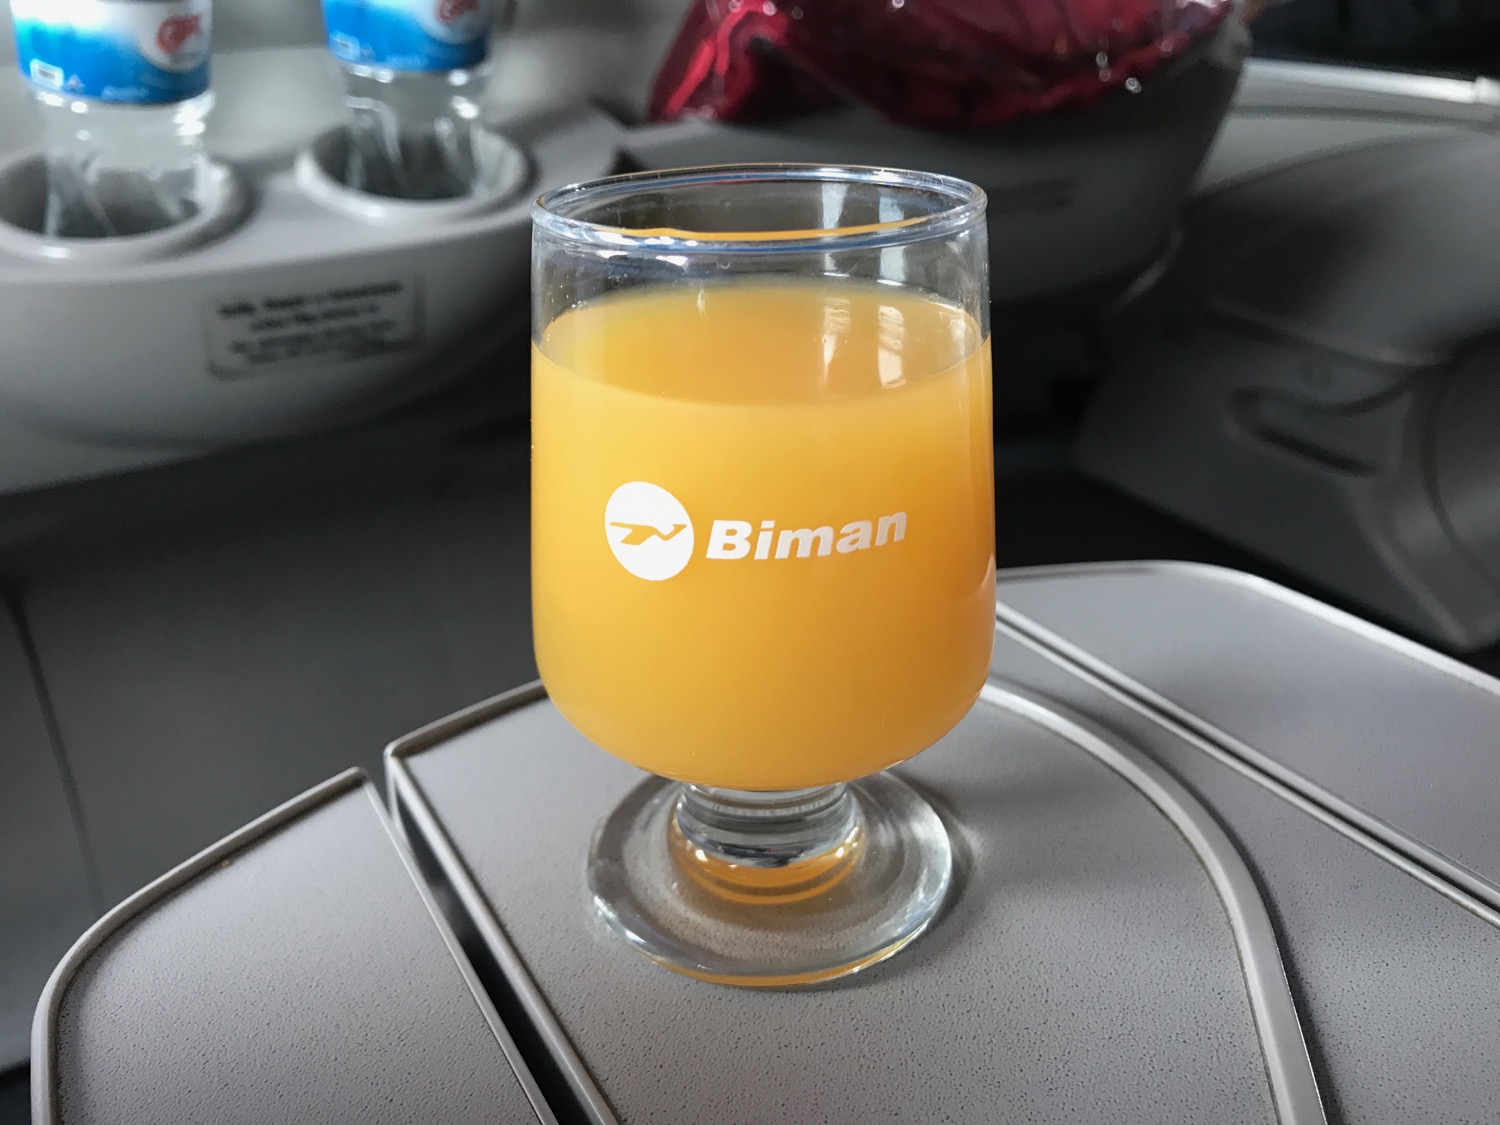 a glass of orange juice on a table